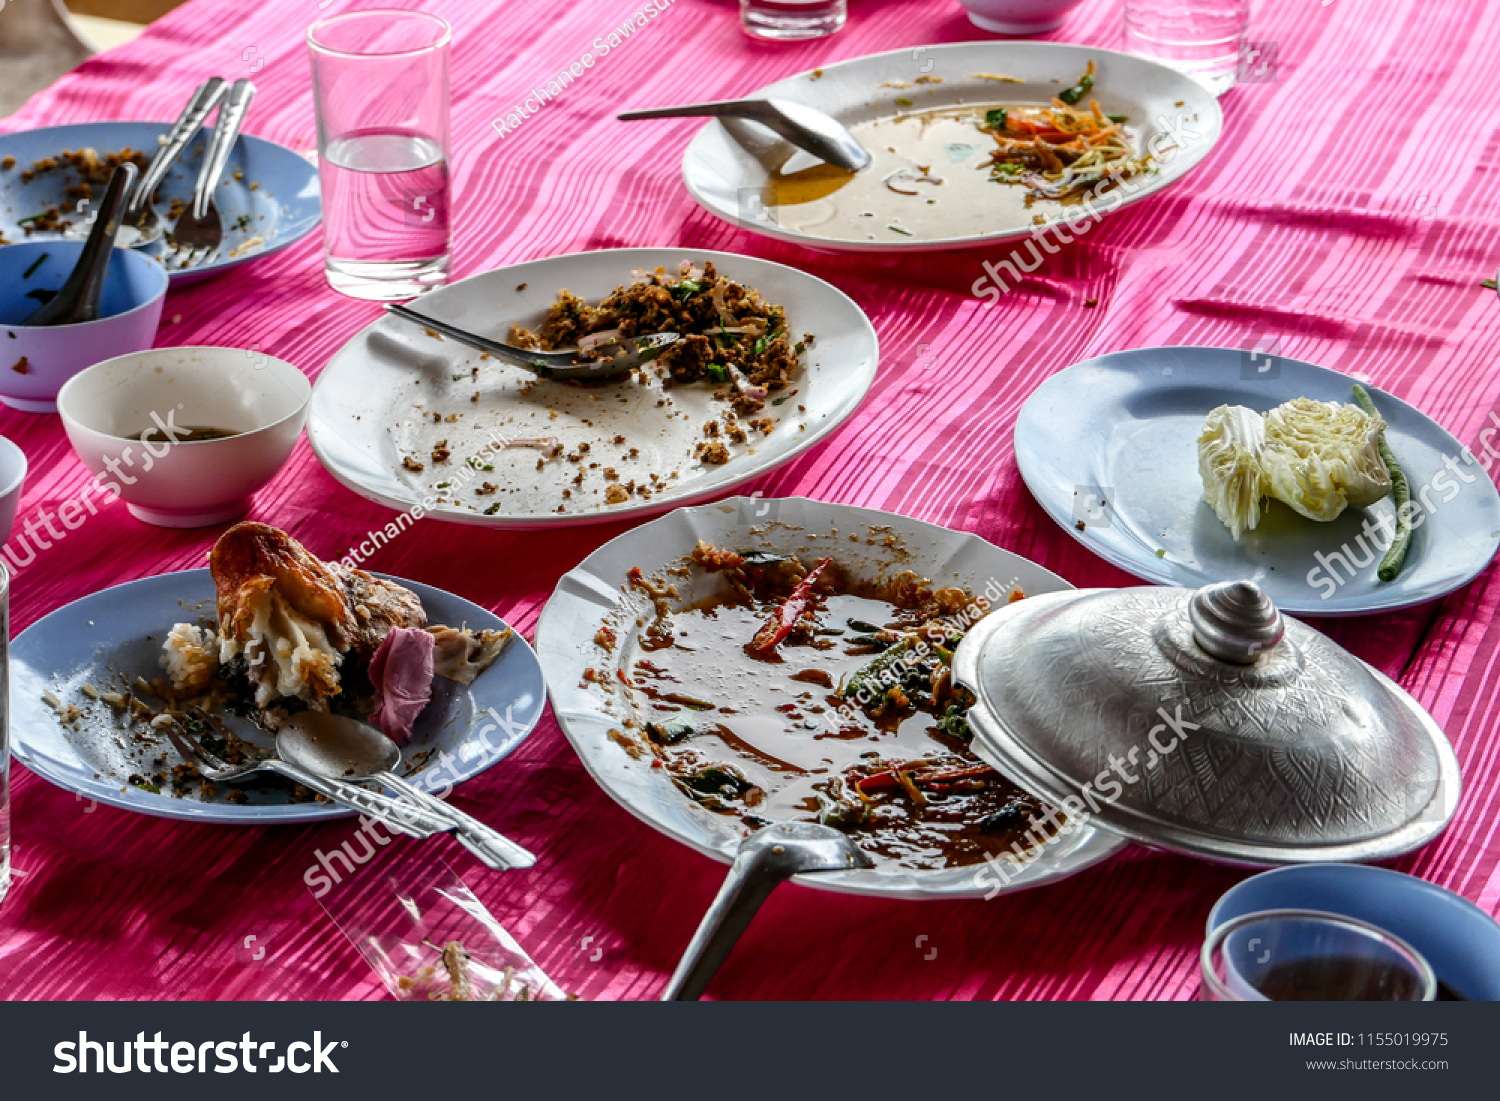 Leftover Food On Food Table Stock Photo Edit Now 1155019975